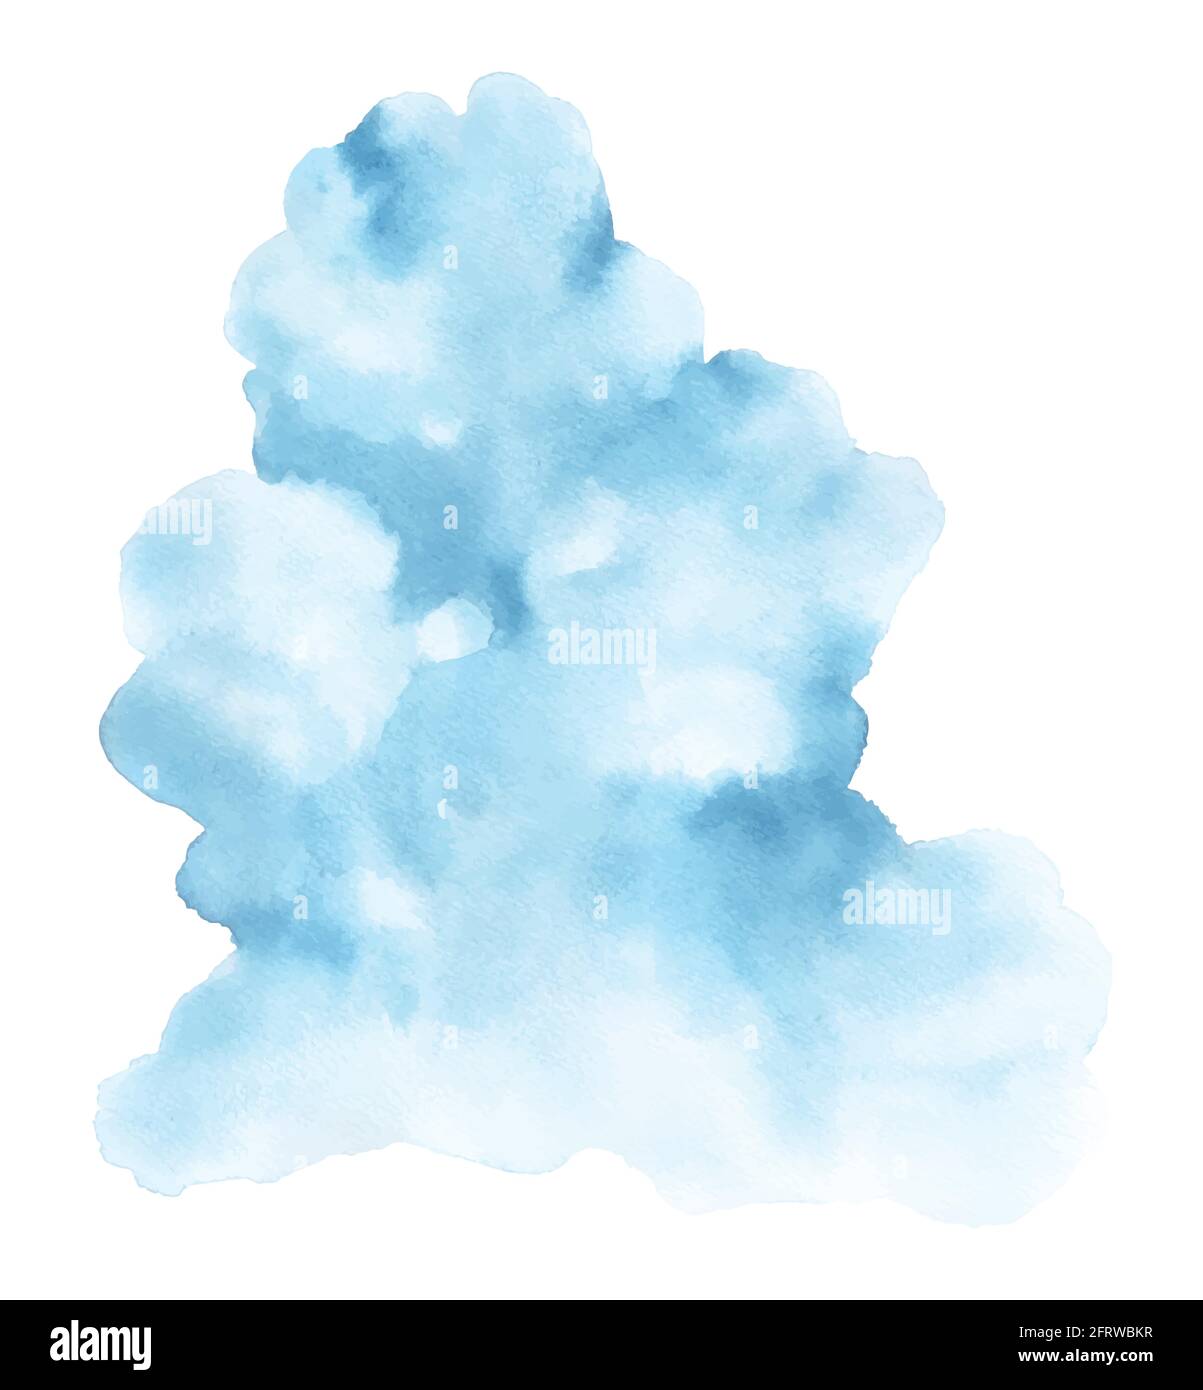 Abstract blue watercolor stain shape. Cloud isolated element by watercolor hand-painted. Stock Vector